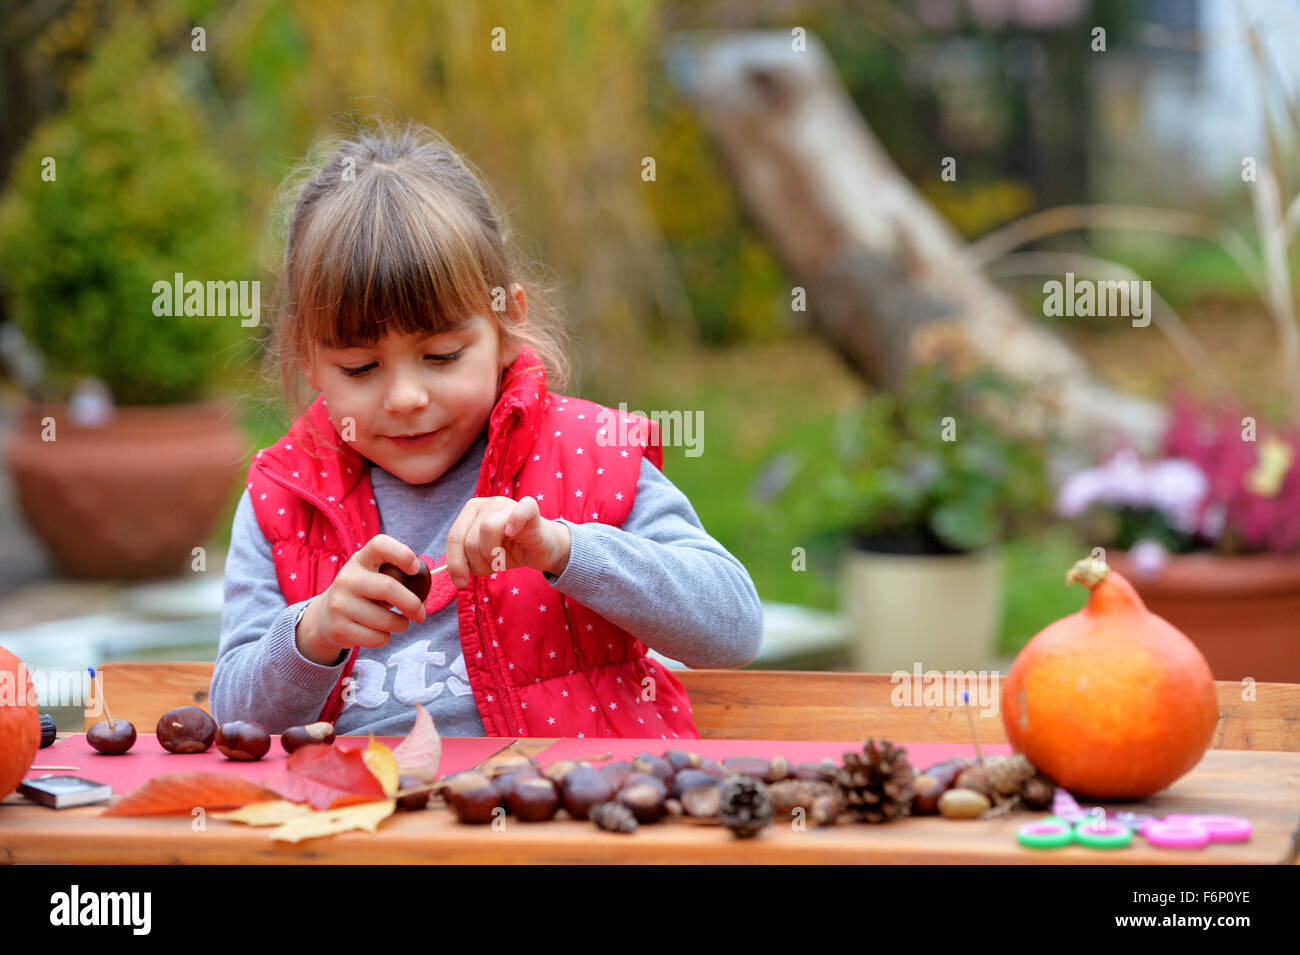 Girl creating crafts with chestnuts and pumpkin. Stock Photo